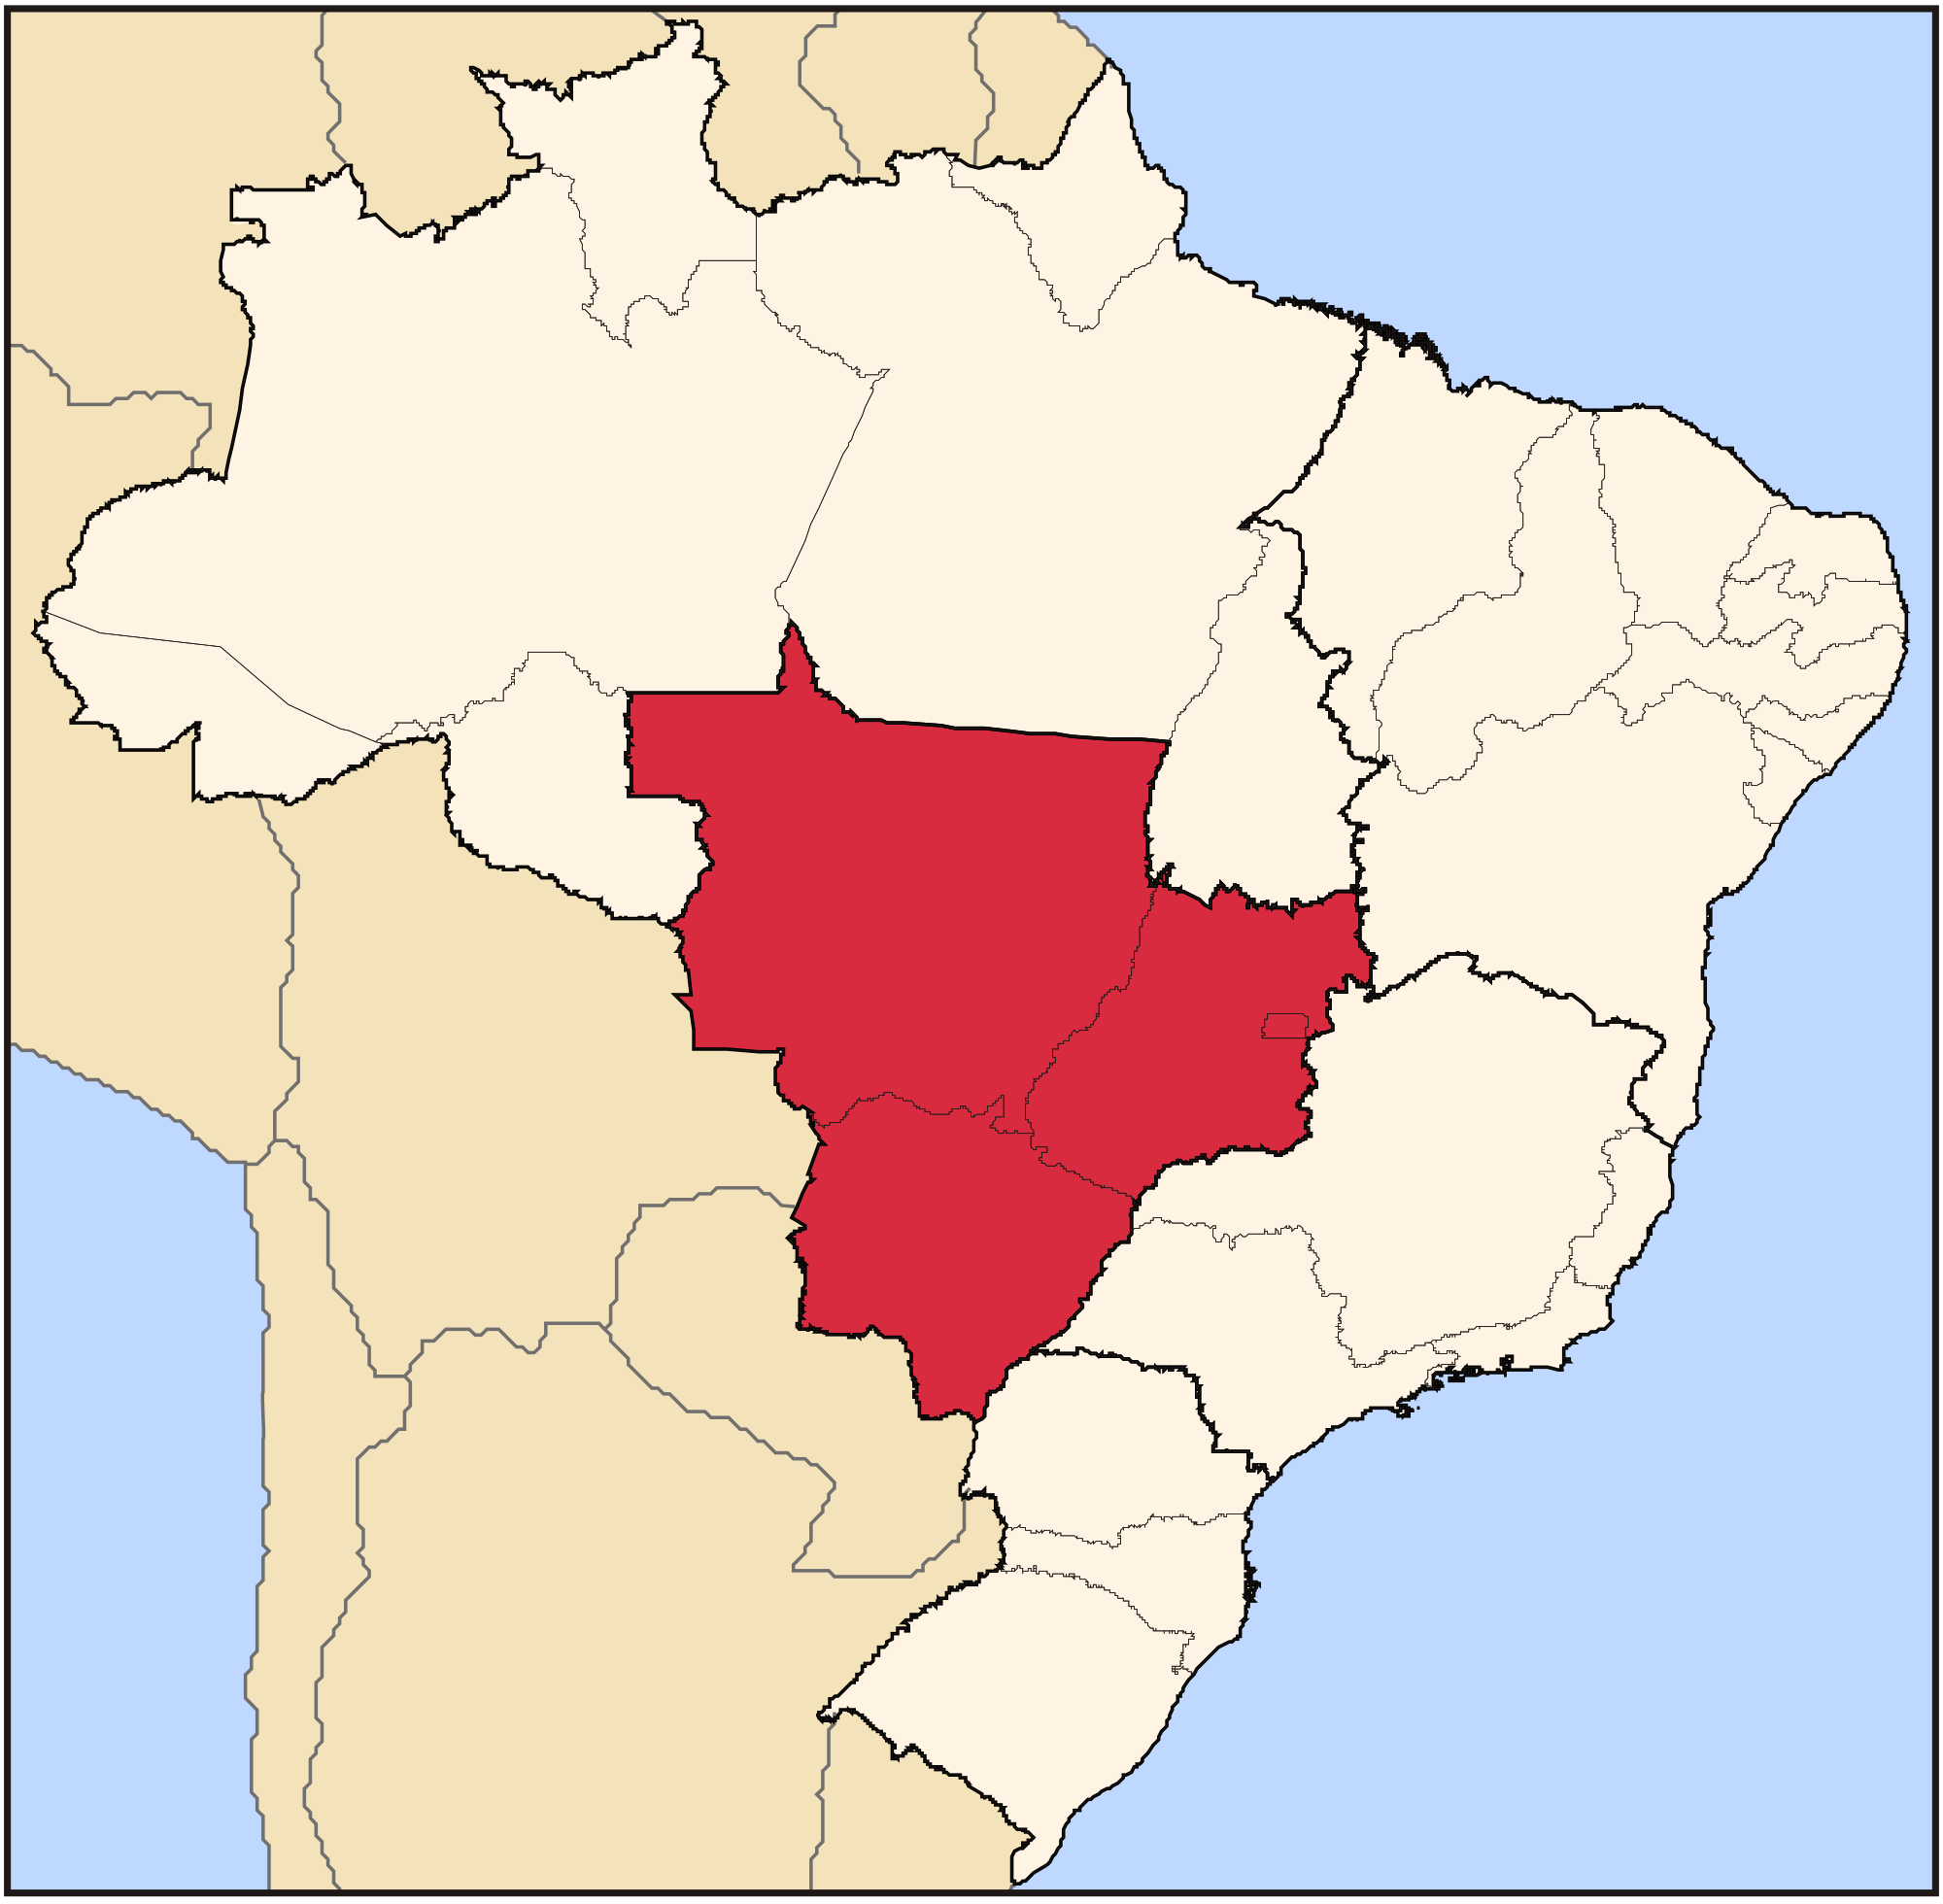 Map of Brazil showing the five geographical regions of the country. The